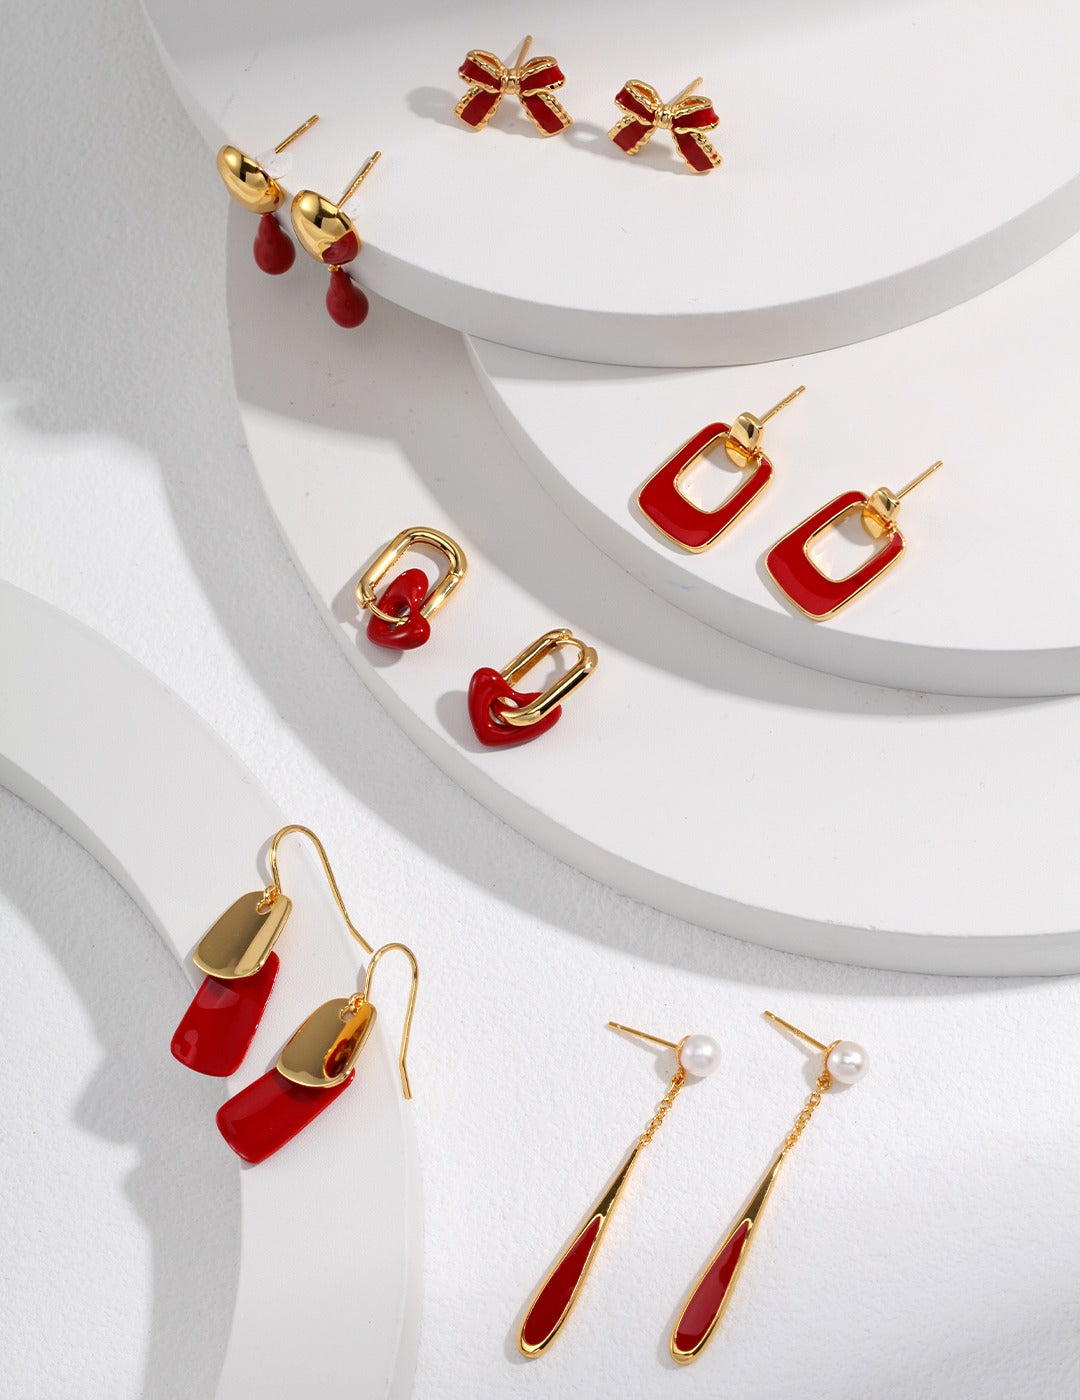 Minimalist Retro Style Gold Earrings with red drip glaze